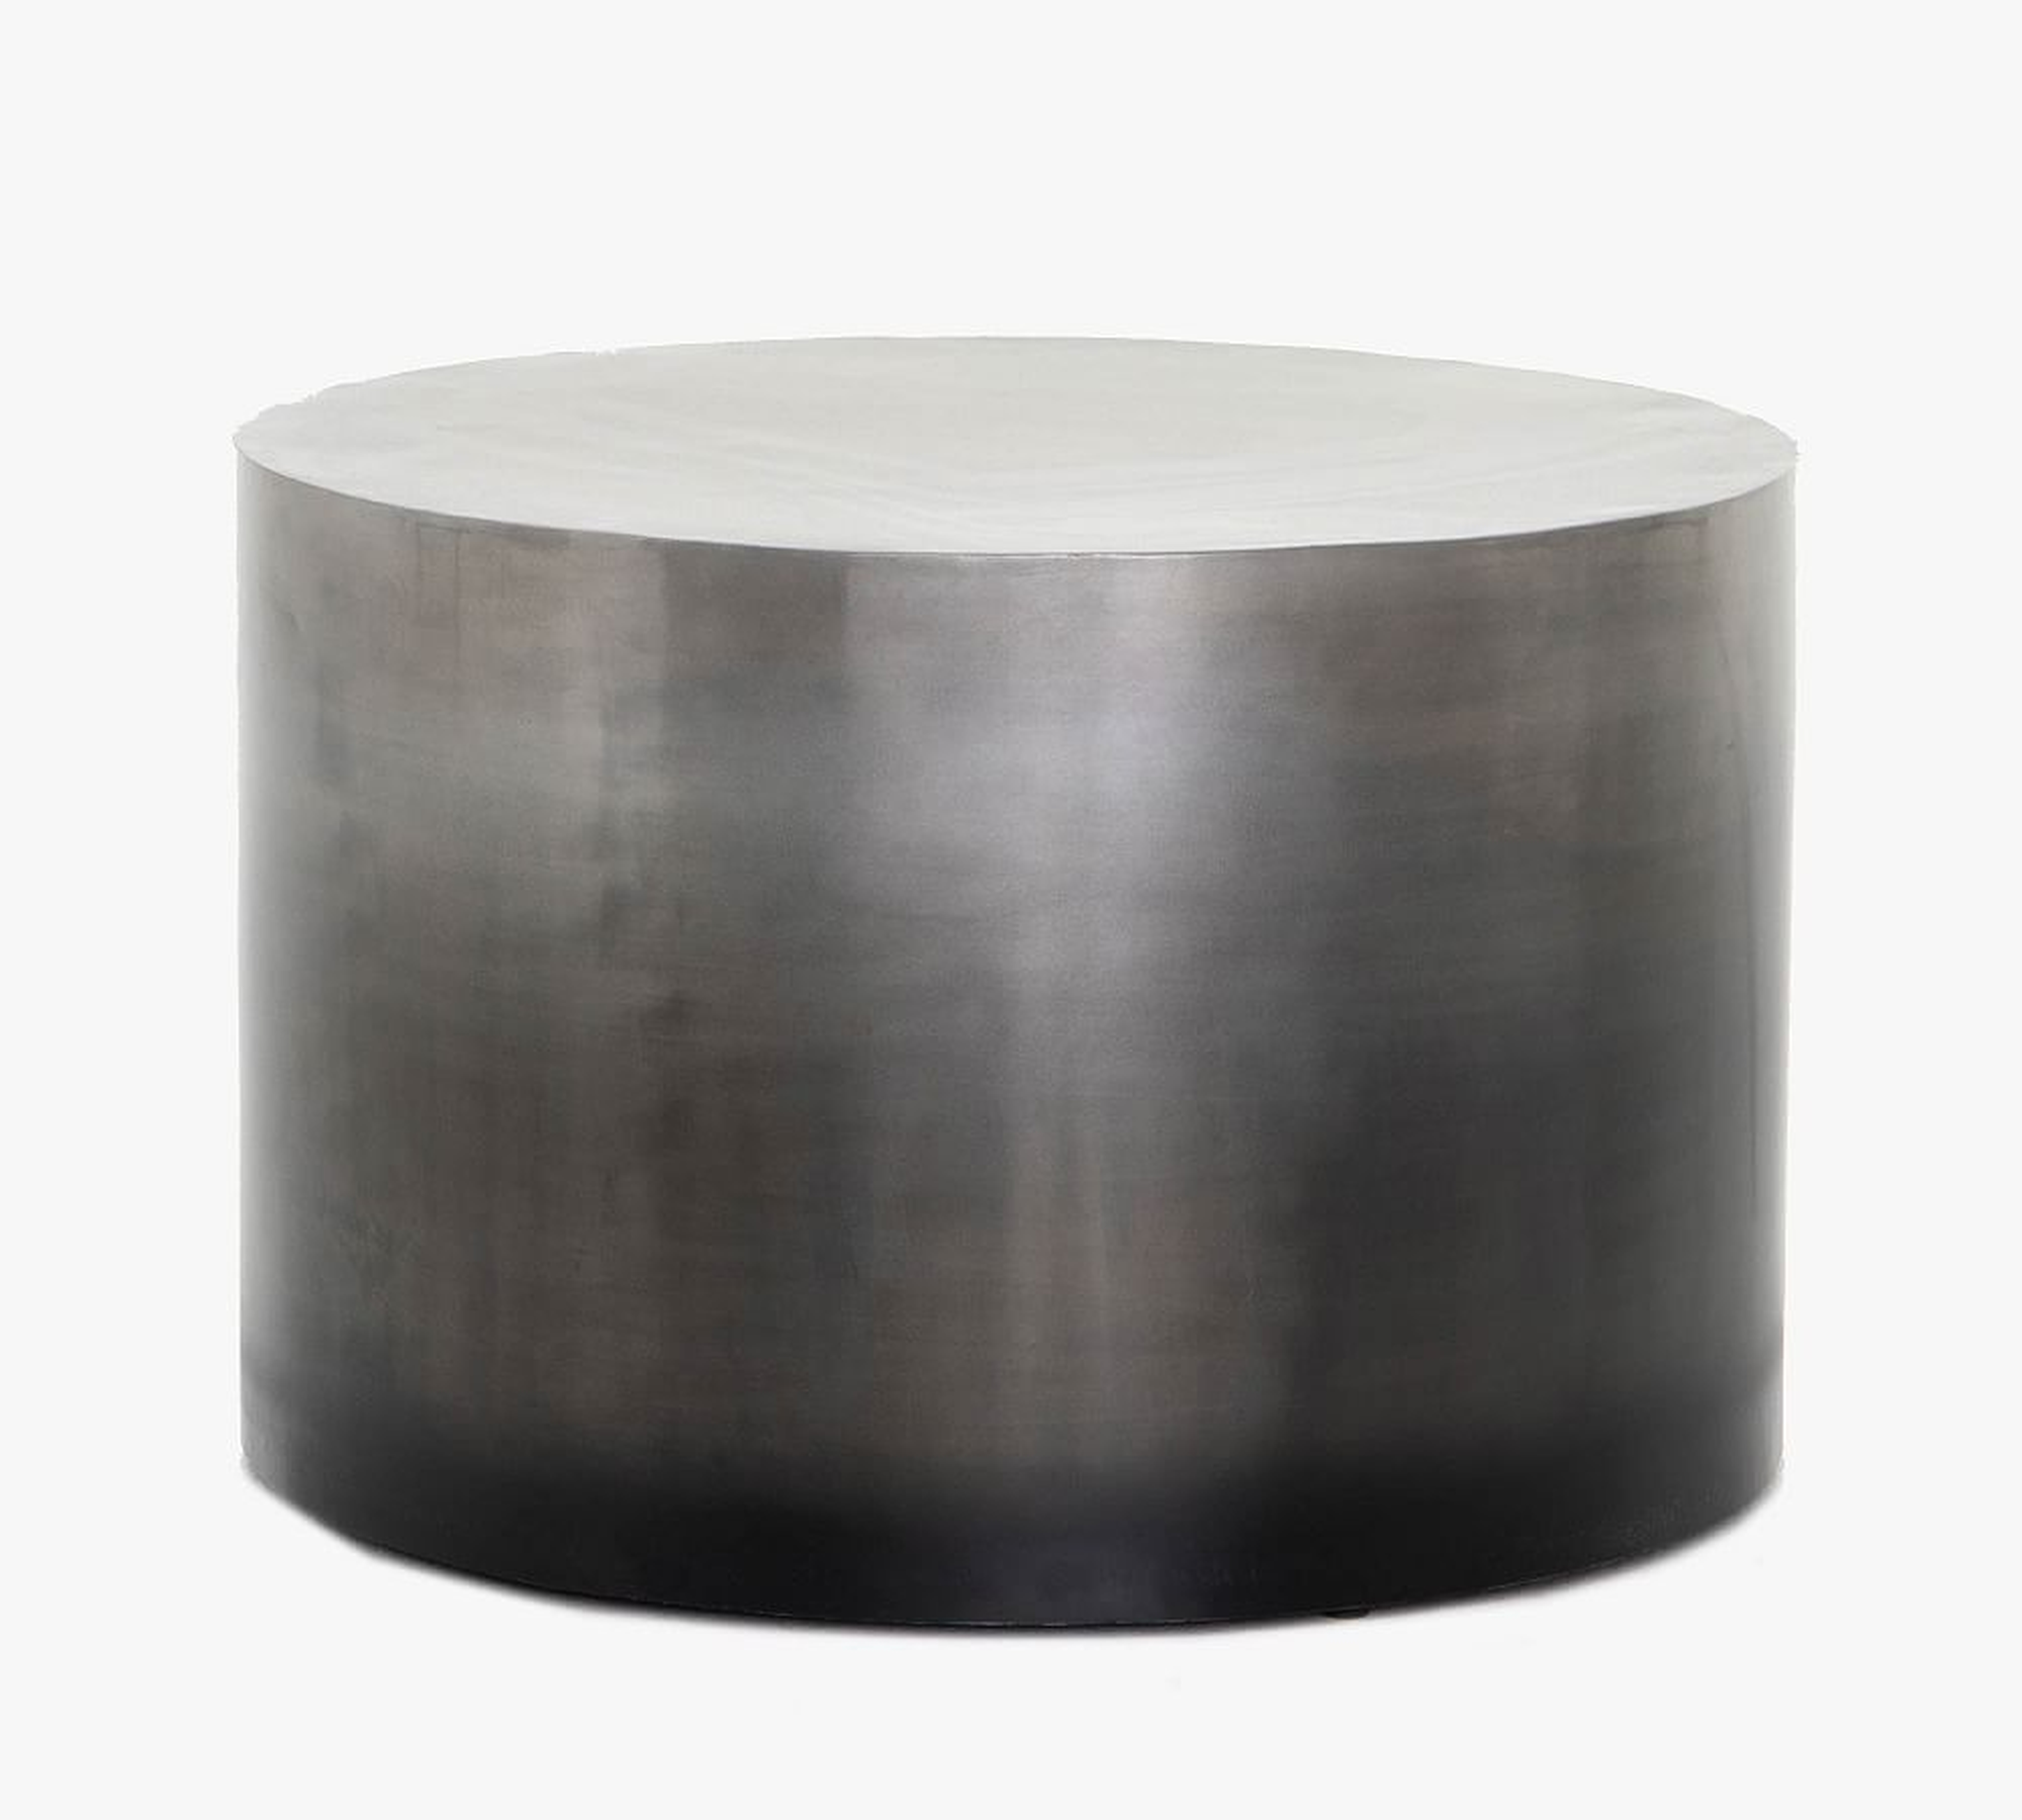 Ferris Round Coffee Table, Ombre Antique Pewter - Pottery Barn